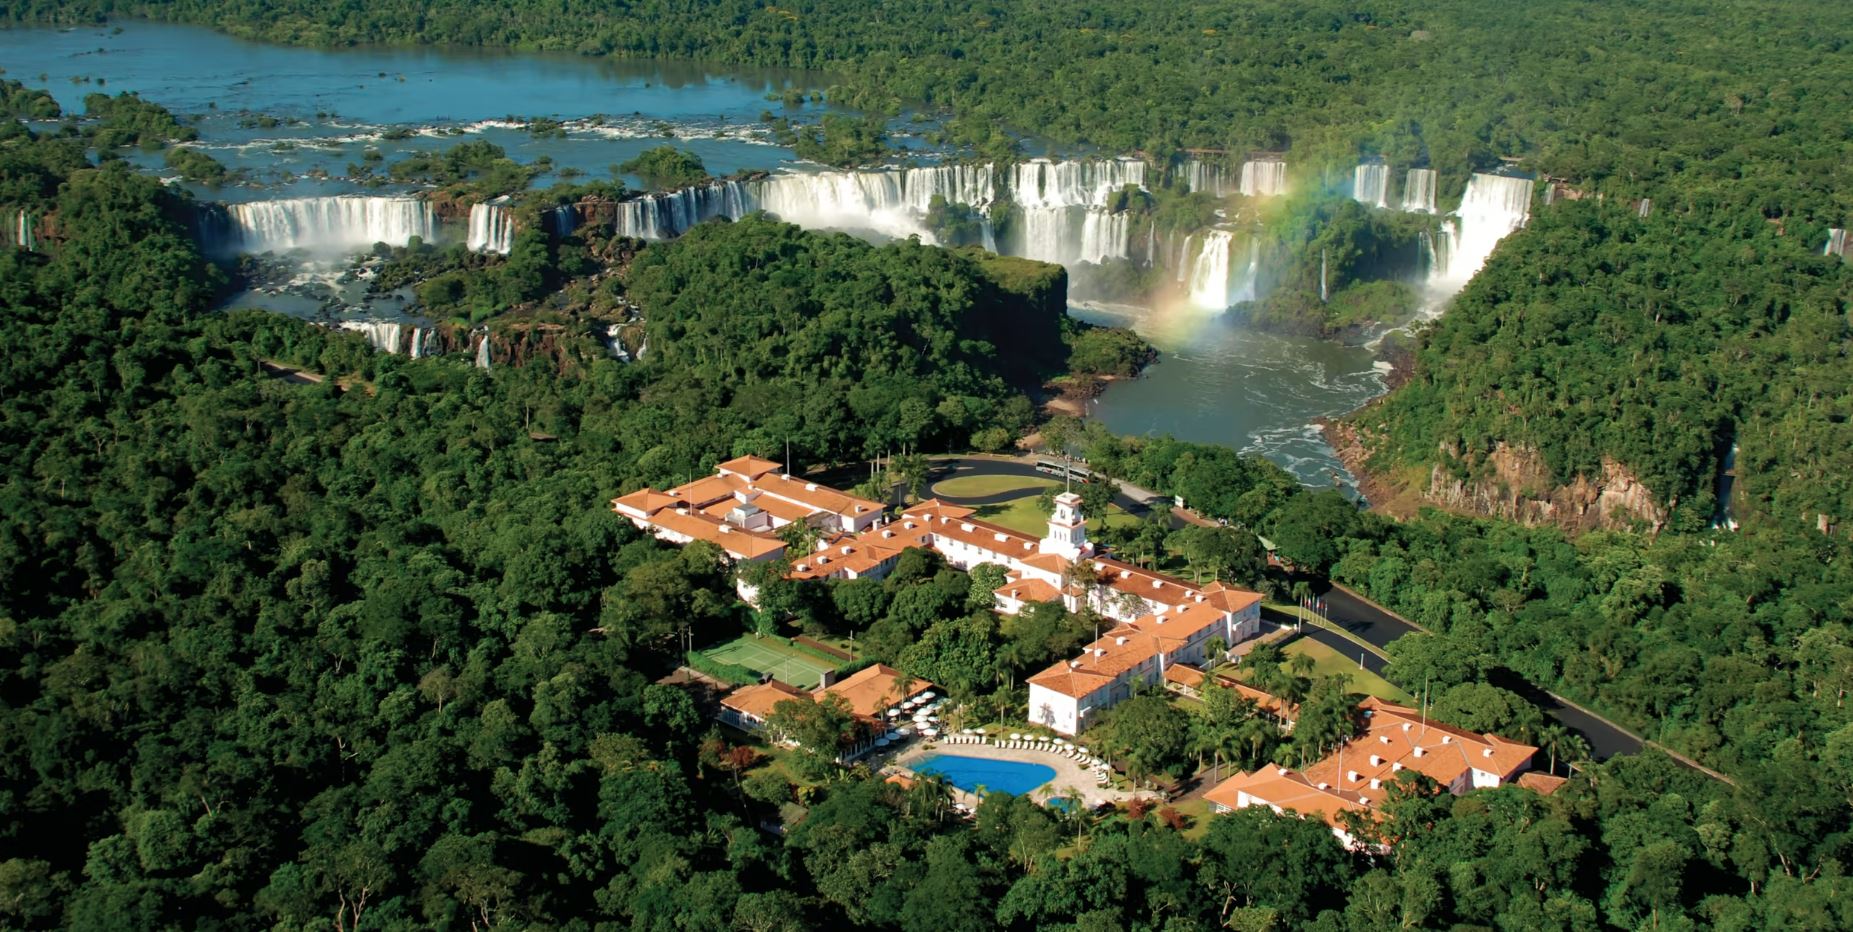 The Hotel das Cataratas was granted to the Belmond group, the same as the luxurious Copacabana Palace Hotel in Rio.